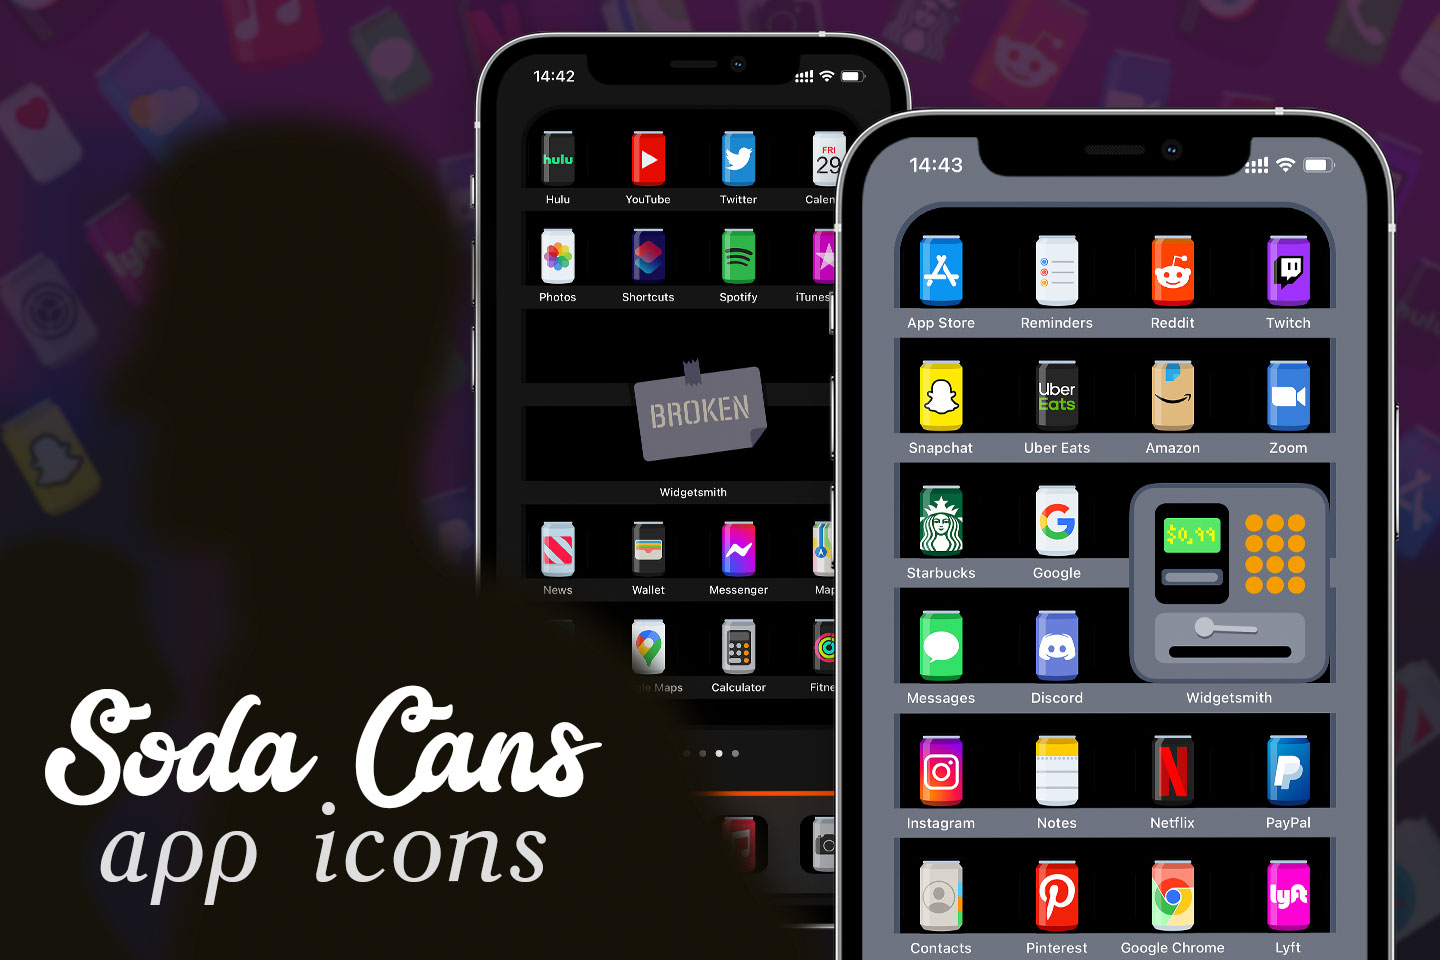 soda cans ios app icons pack